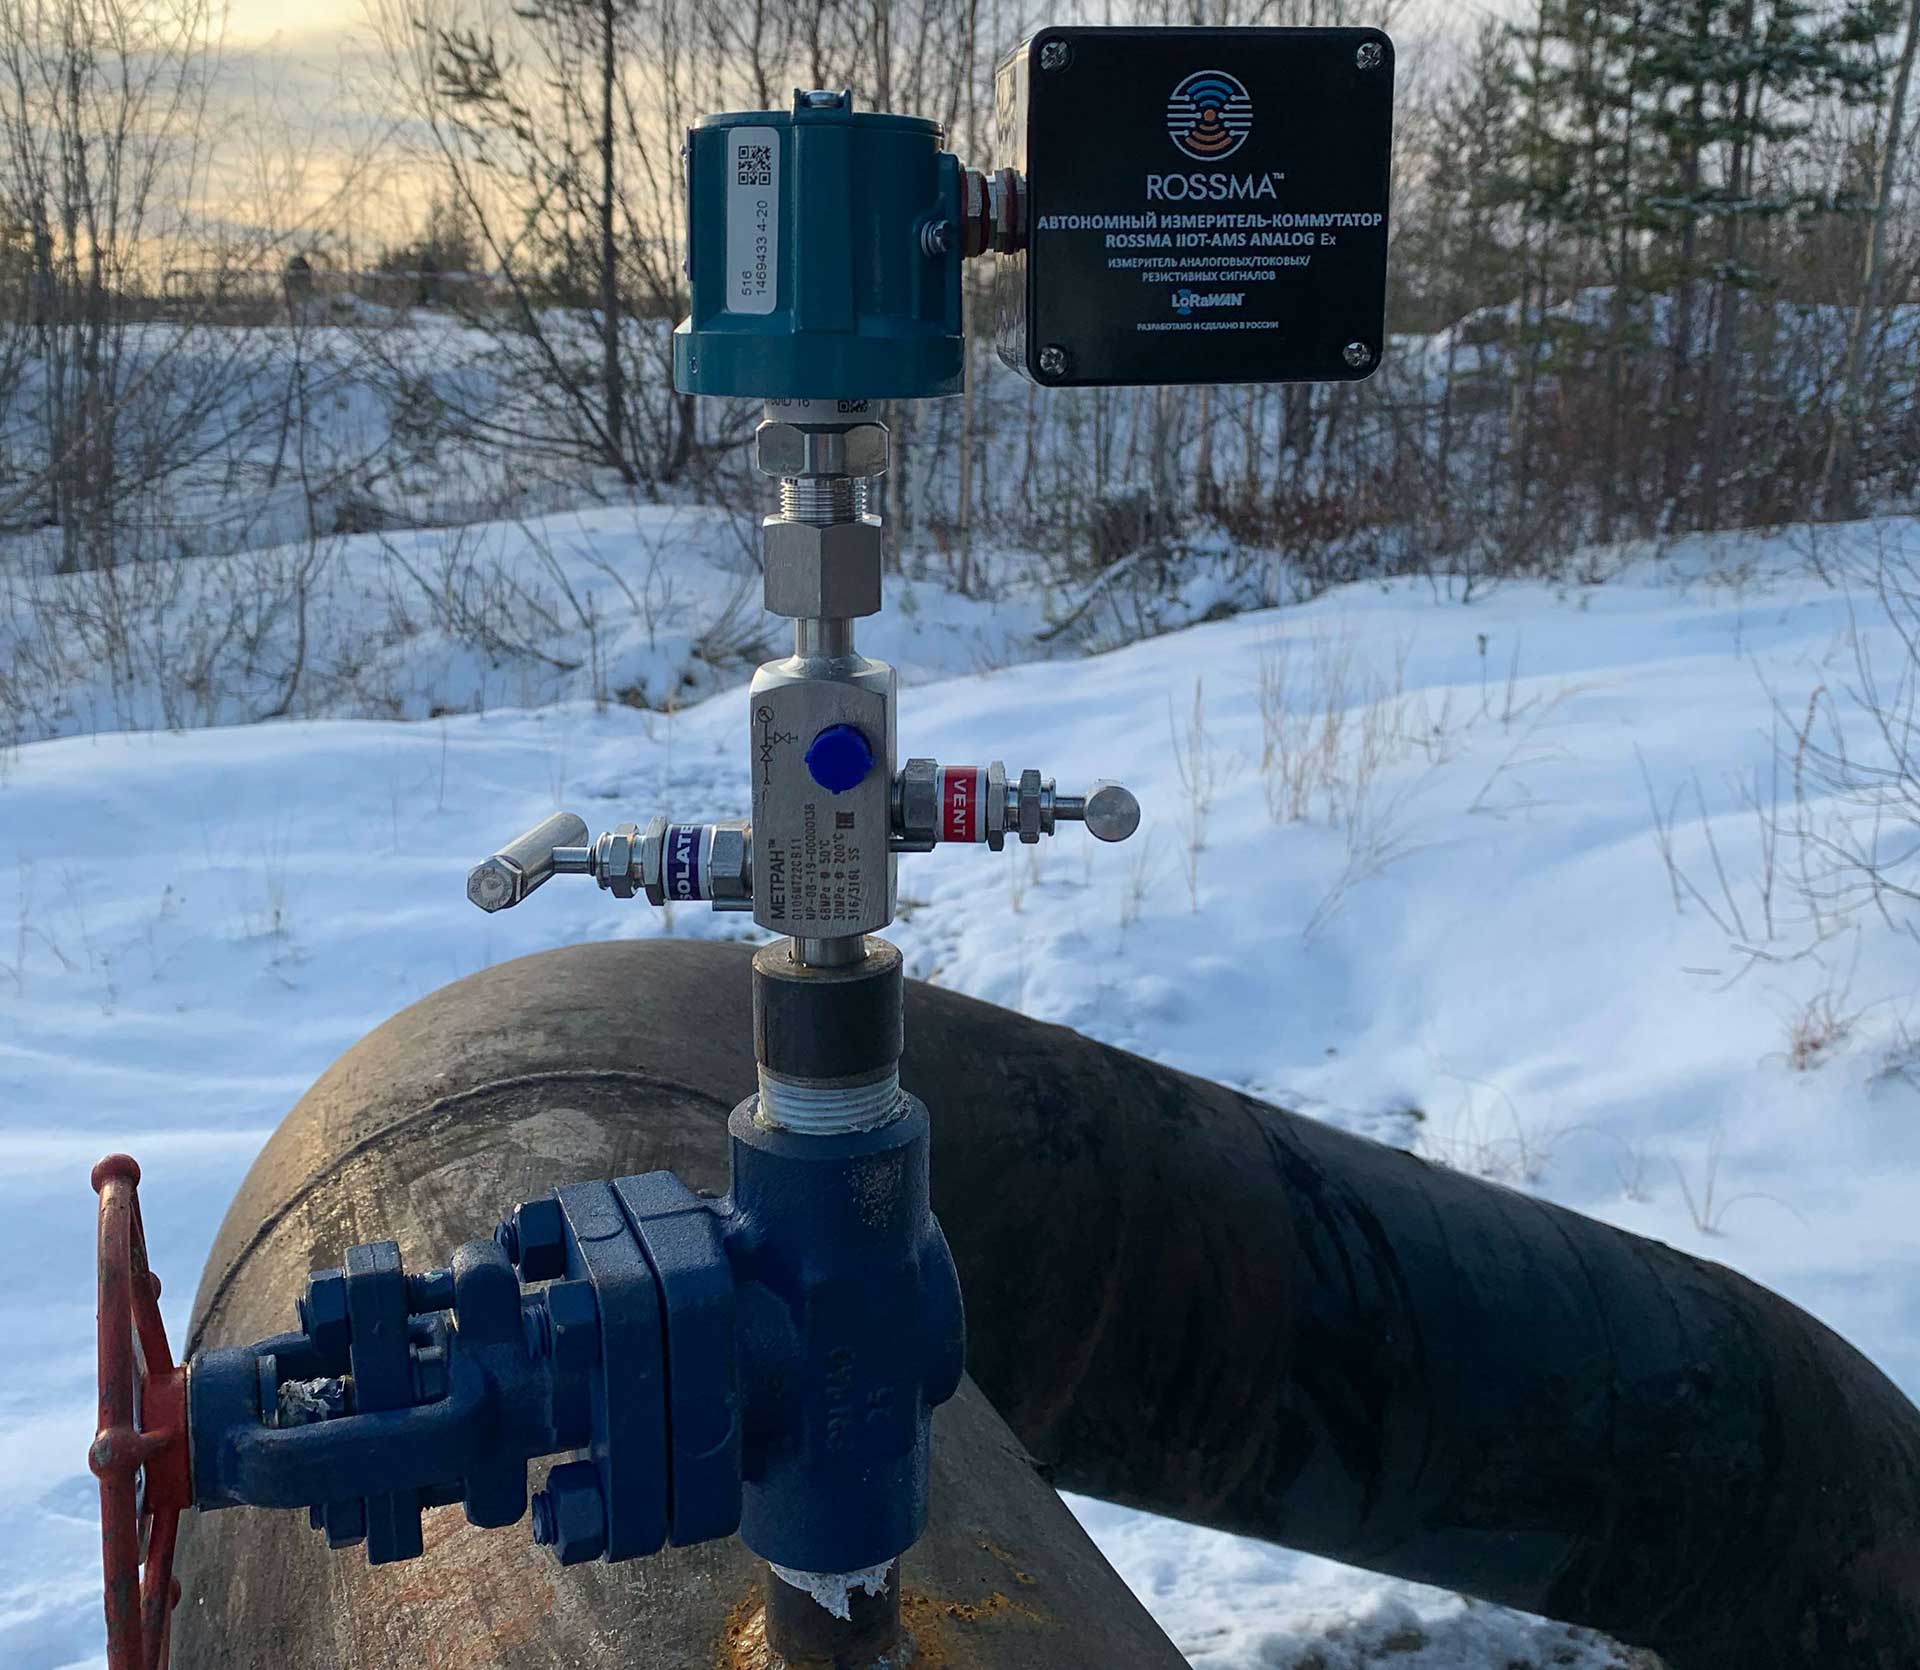 Pipeline monitoring system in Khanty-Mansiisk autonomous district